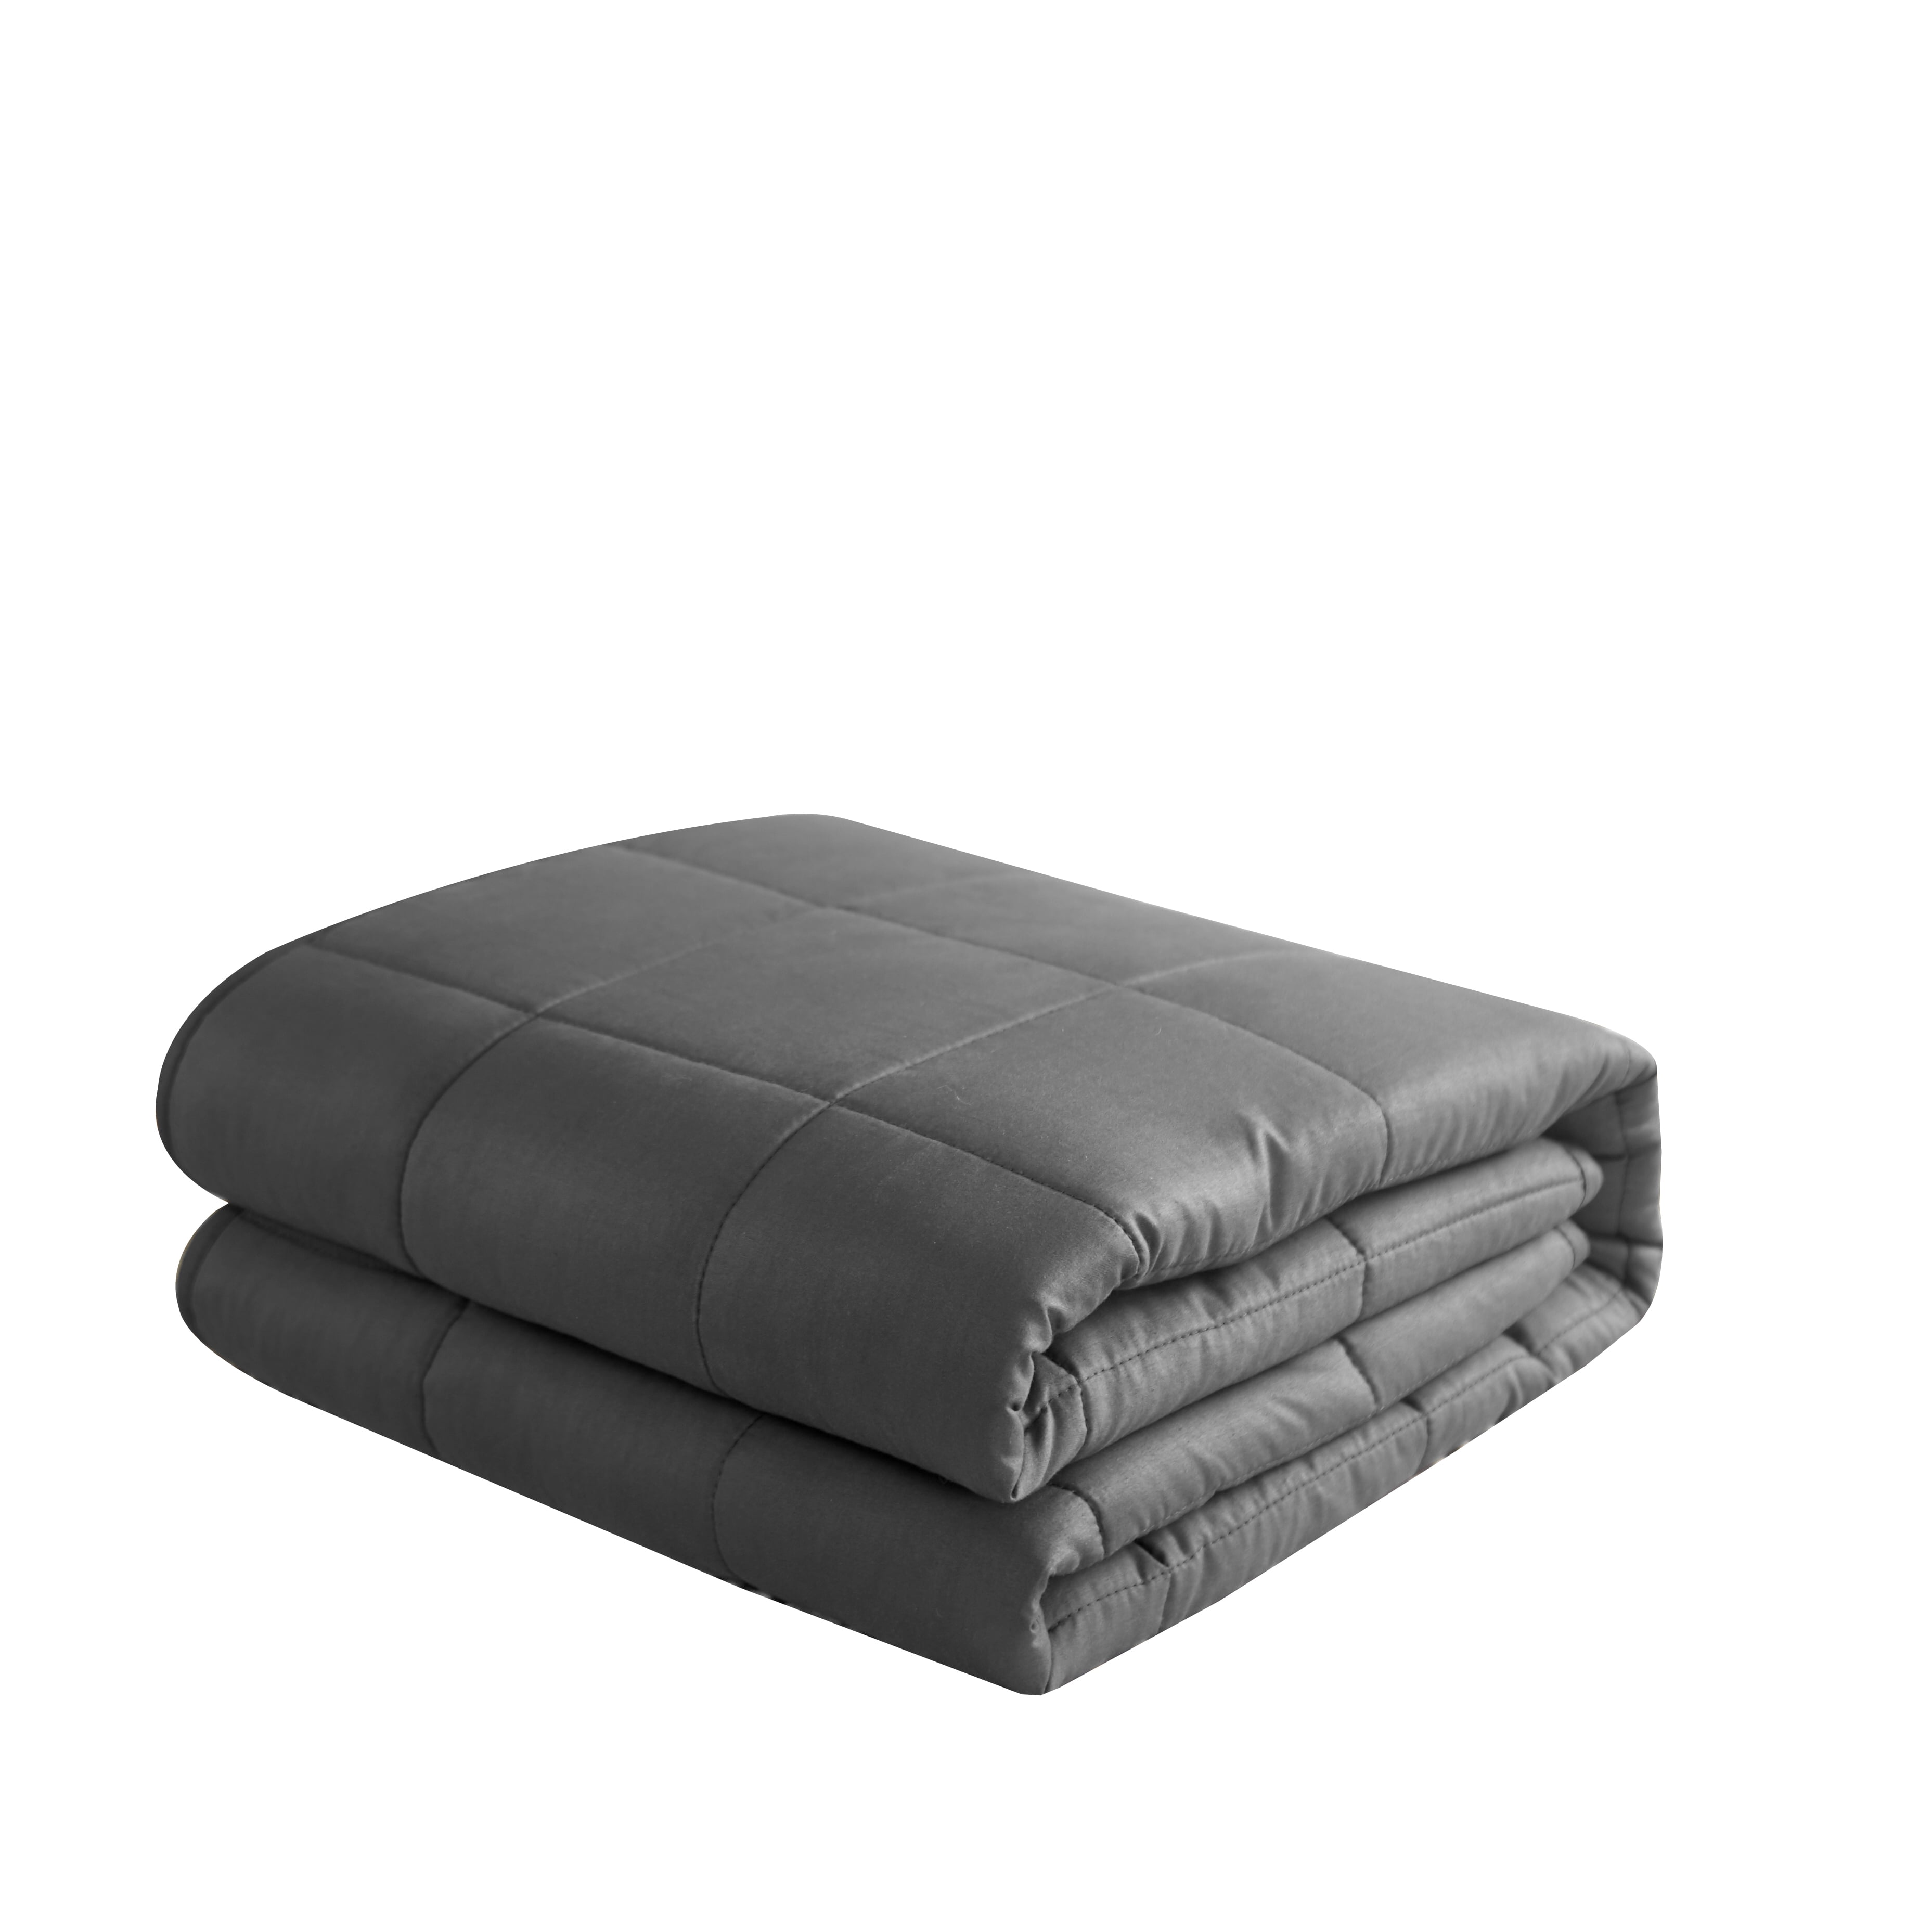 Well Being Weighted Blankets, Best Weighted Blanket For Queen Size Bed